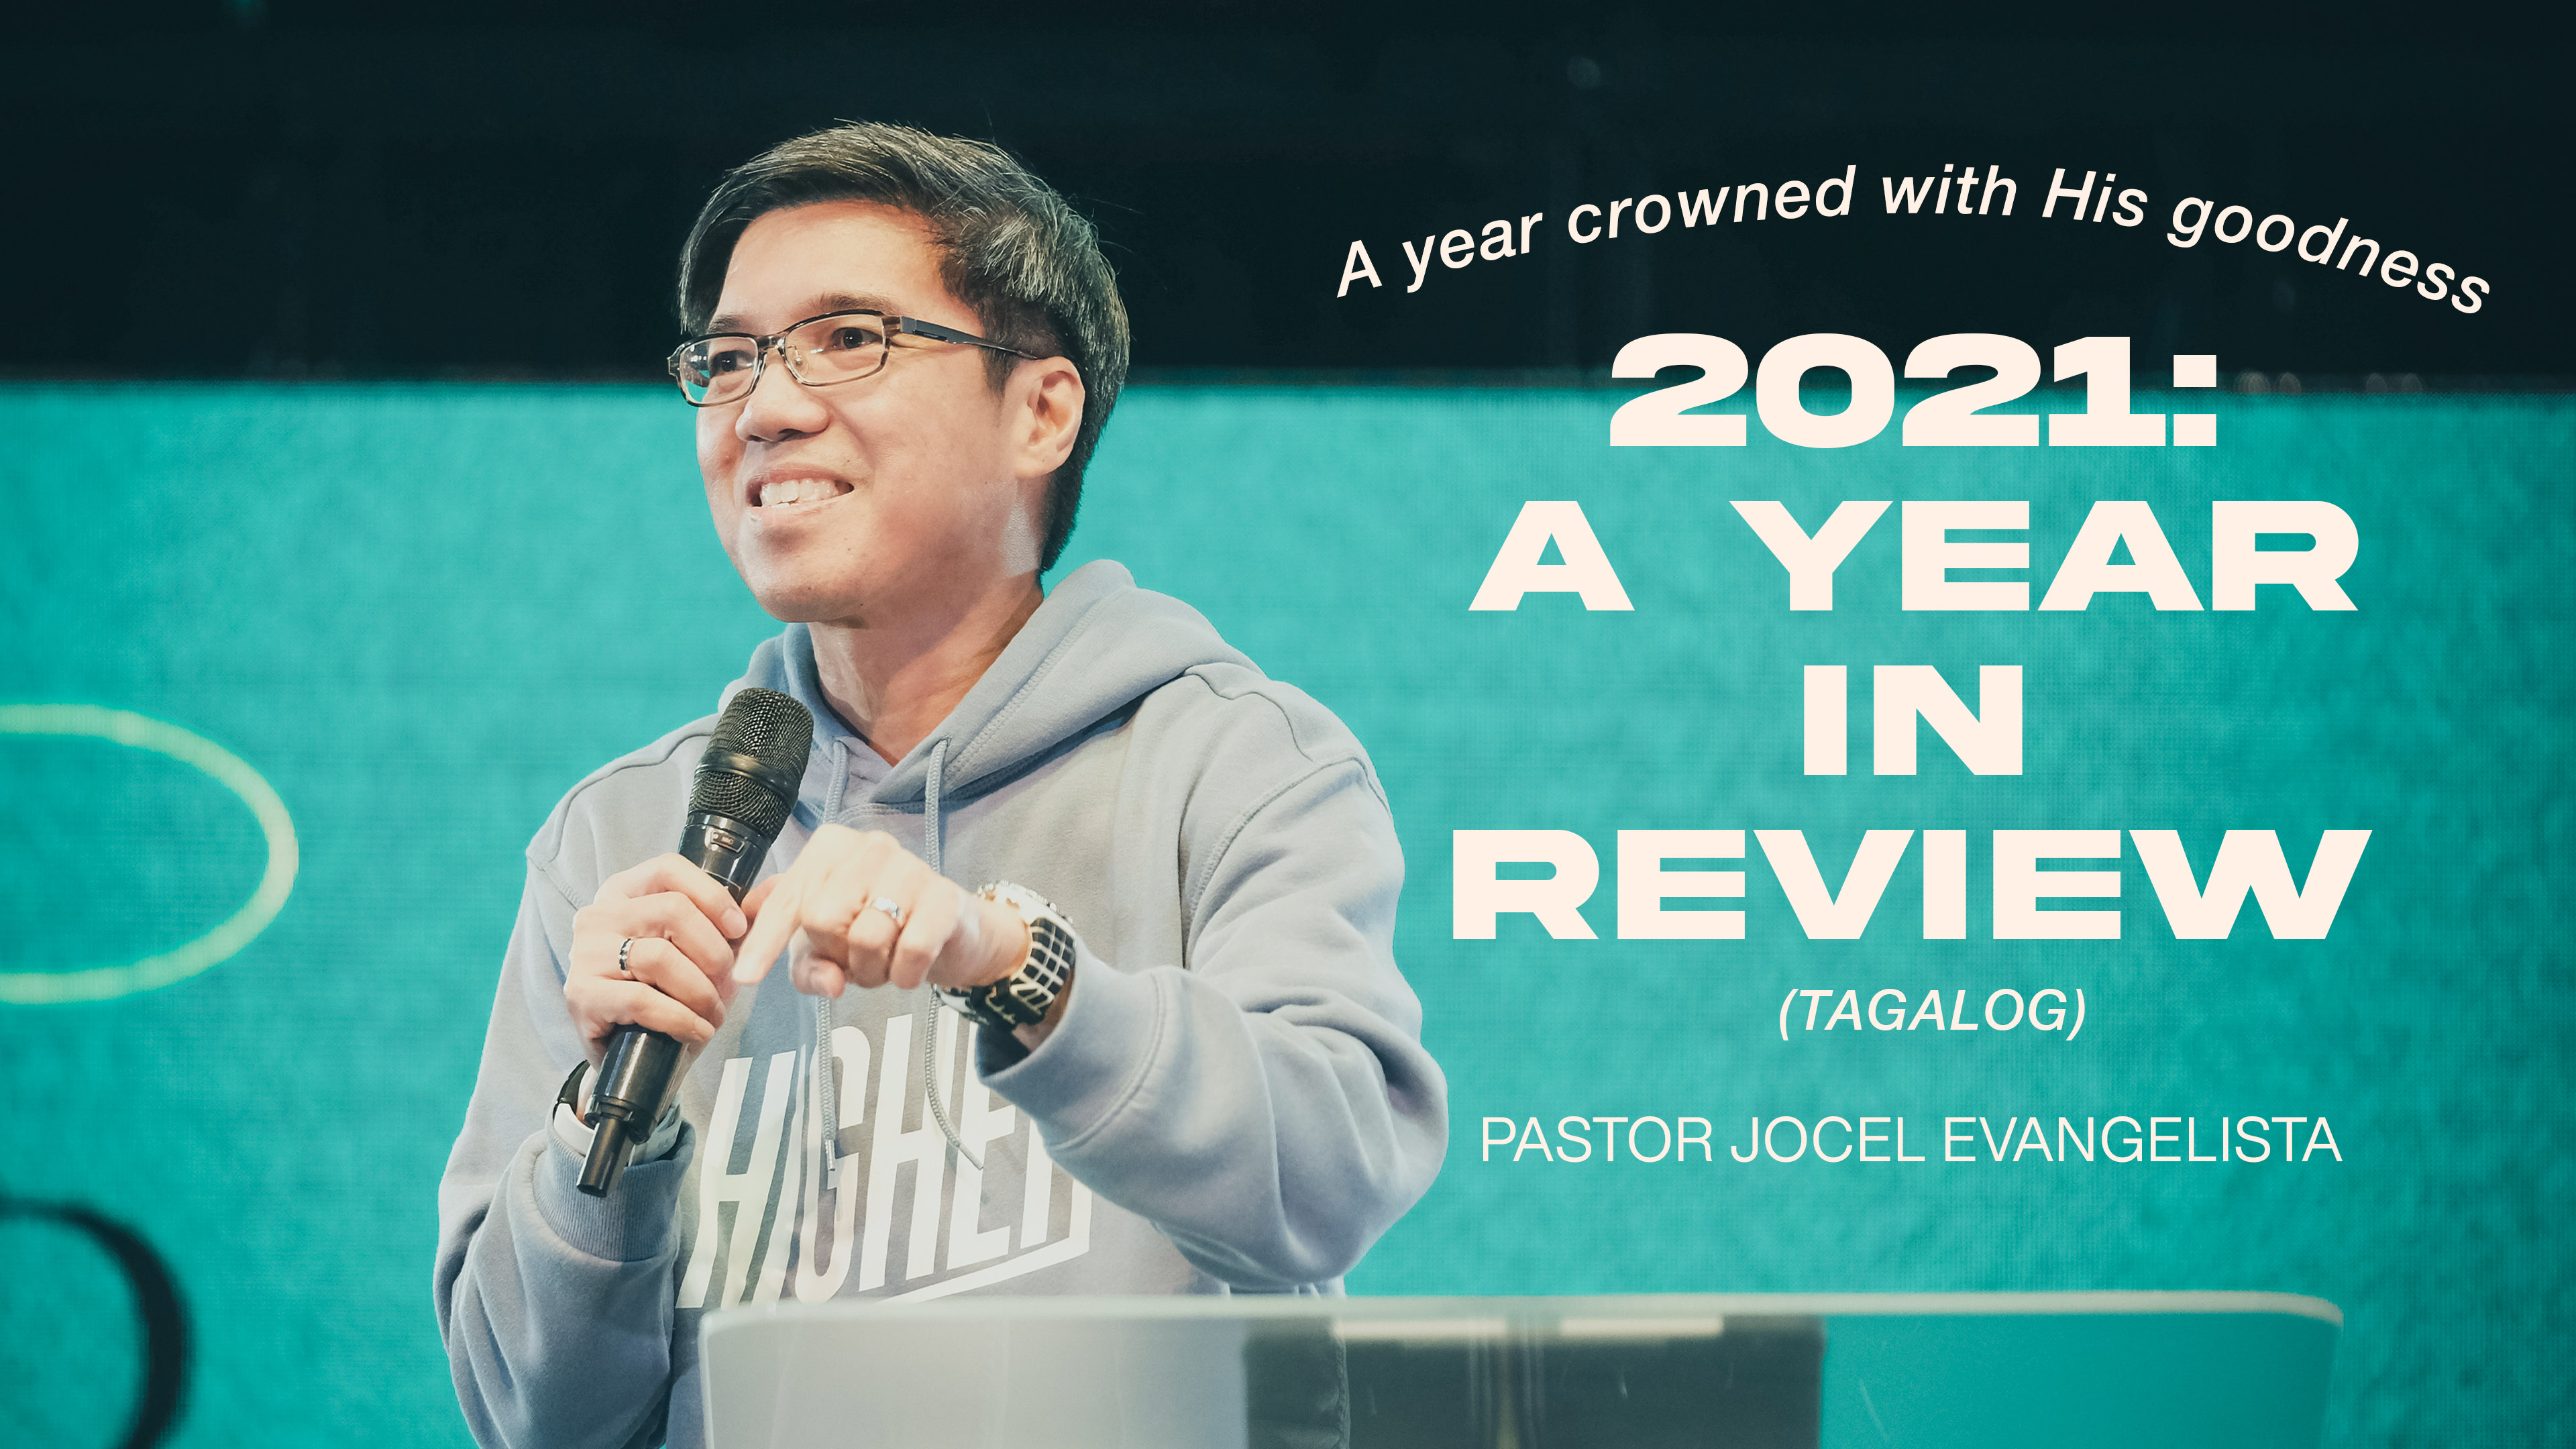 A YEAR CROWNED WITH HIS GOODNESS 2021: A YEAR IN REVIEW